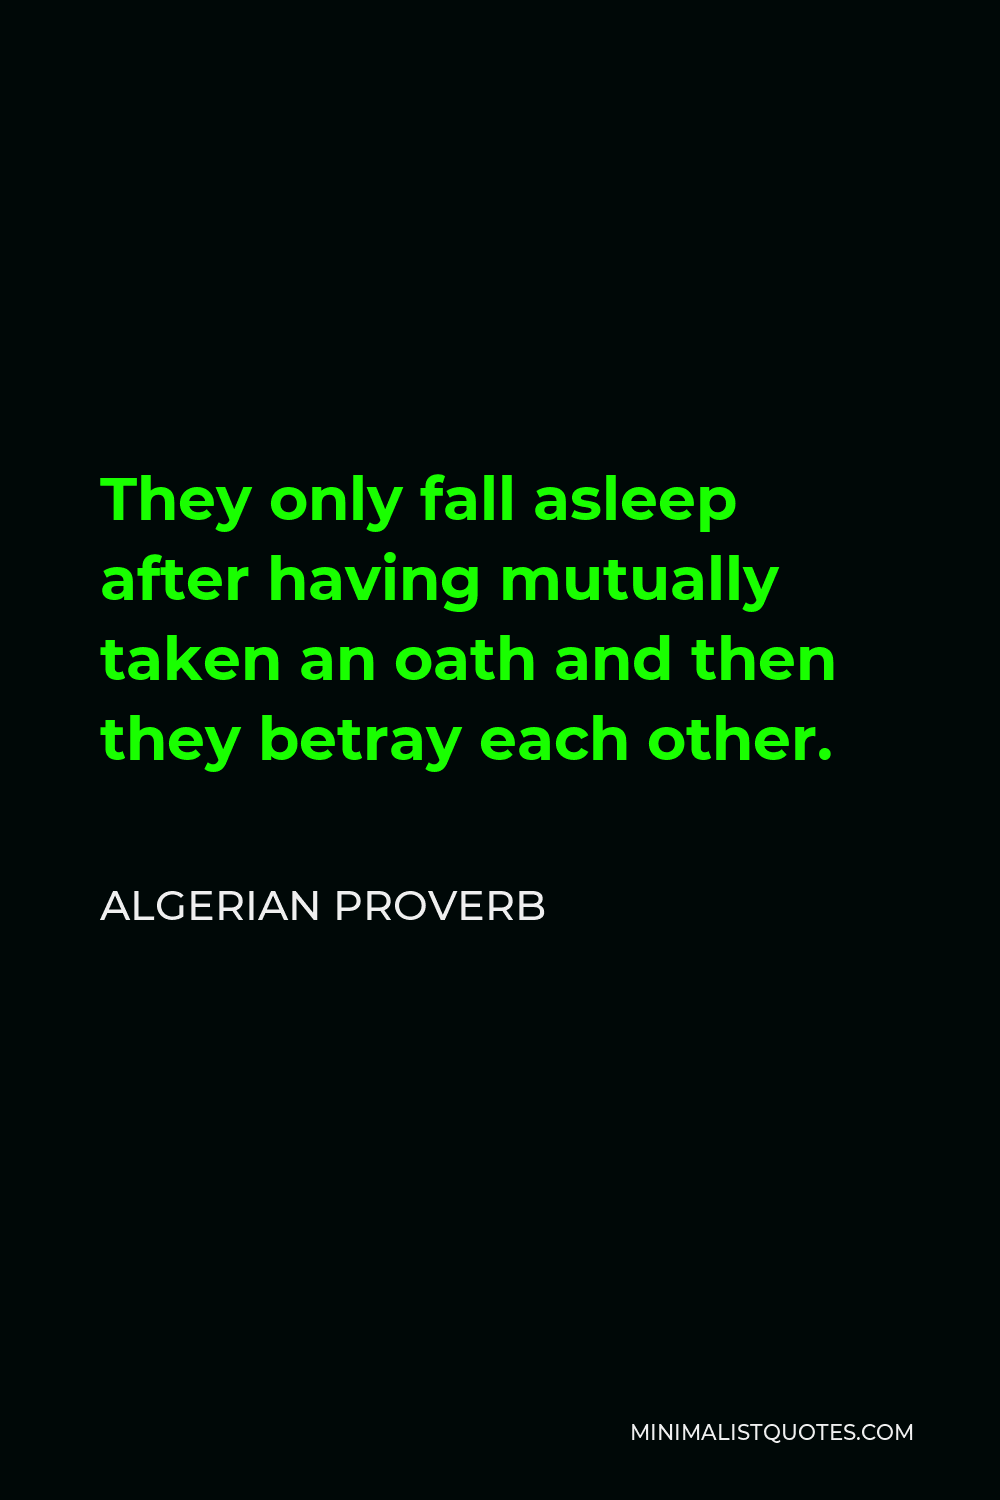 Algerian Proverb Quote - They only fall asleep after having mutually taken an oath and then they betray each other.